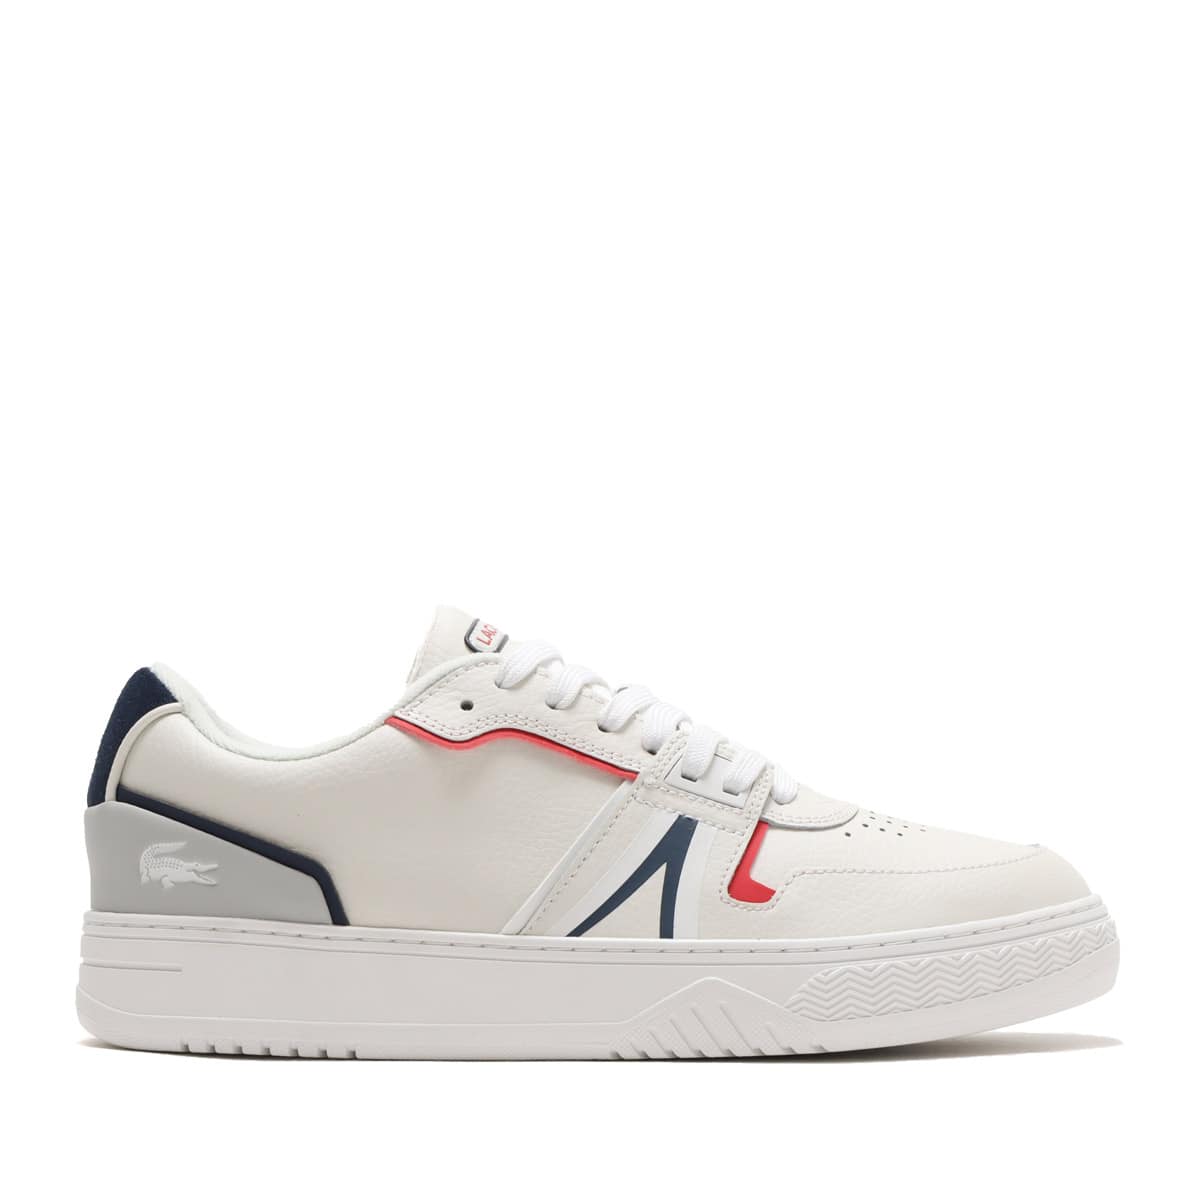 LACOSTE L001 0321 1 WHITE/NAVY/RED 21FA-I